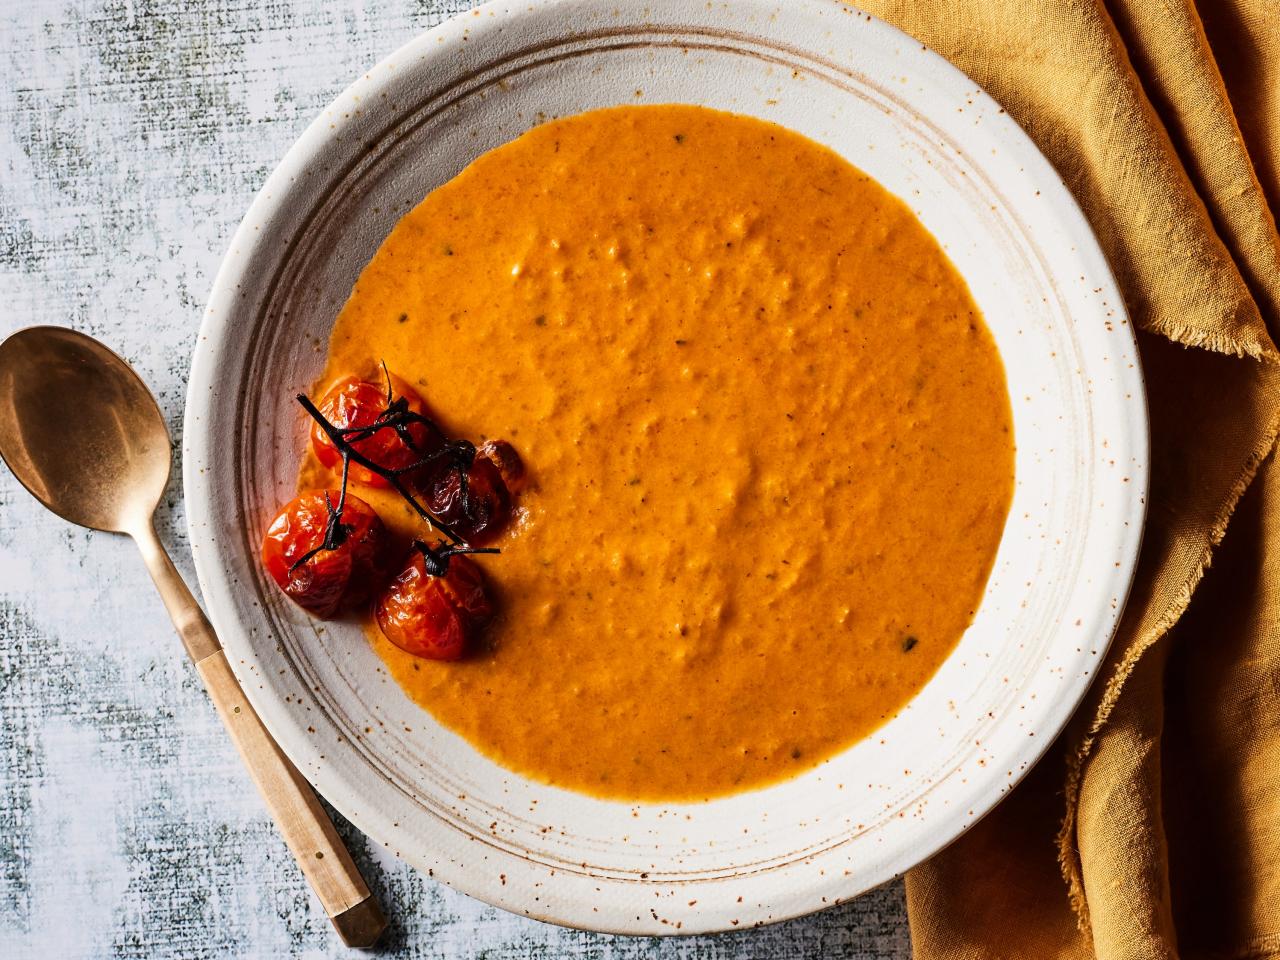 Roasted Tomato Soup with Fresh Tomatoes